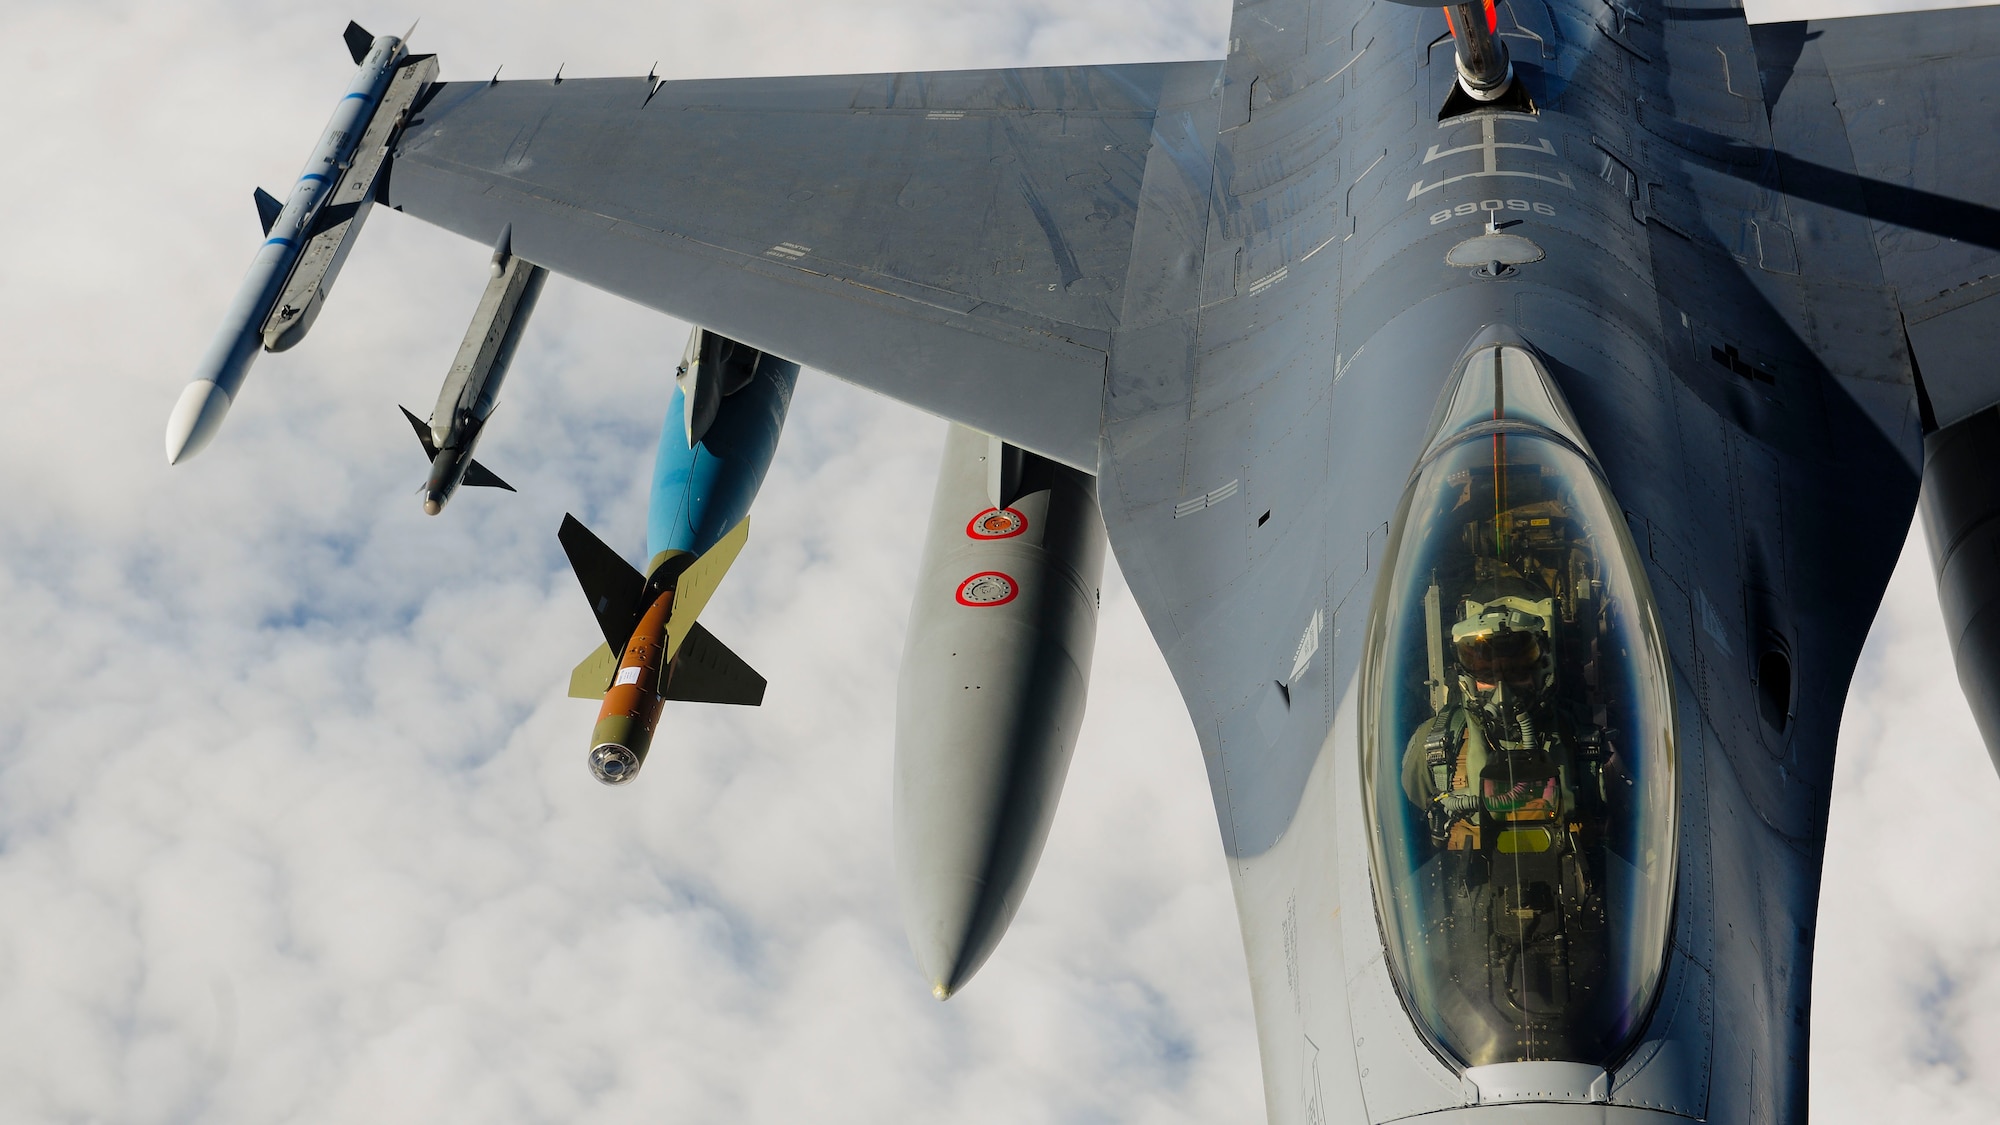 An F-16 Fighting Falcon from the 555th Fighter Squadron, Aviano Air Base, Italy, receives fuel from a KC-135 Stratotanker, assigned to the Arizona Air National Guard’s 161st Air Refueling Wing, Jan. 27, 2017, at Souda Bay, Greece. The KC-135 refueled U.S. and Hellenic air force F-16s during the FTD, which was hosted to evaluate aircraft and personnel capabilities and increase interoperability between the two NATO allies. (U.S. Air Force photo by Staff Sgt. Austin Harvill)
